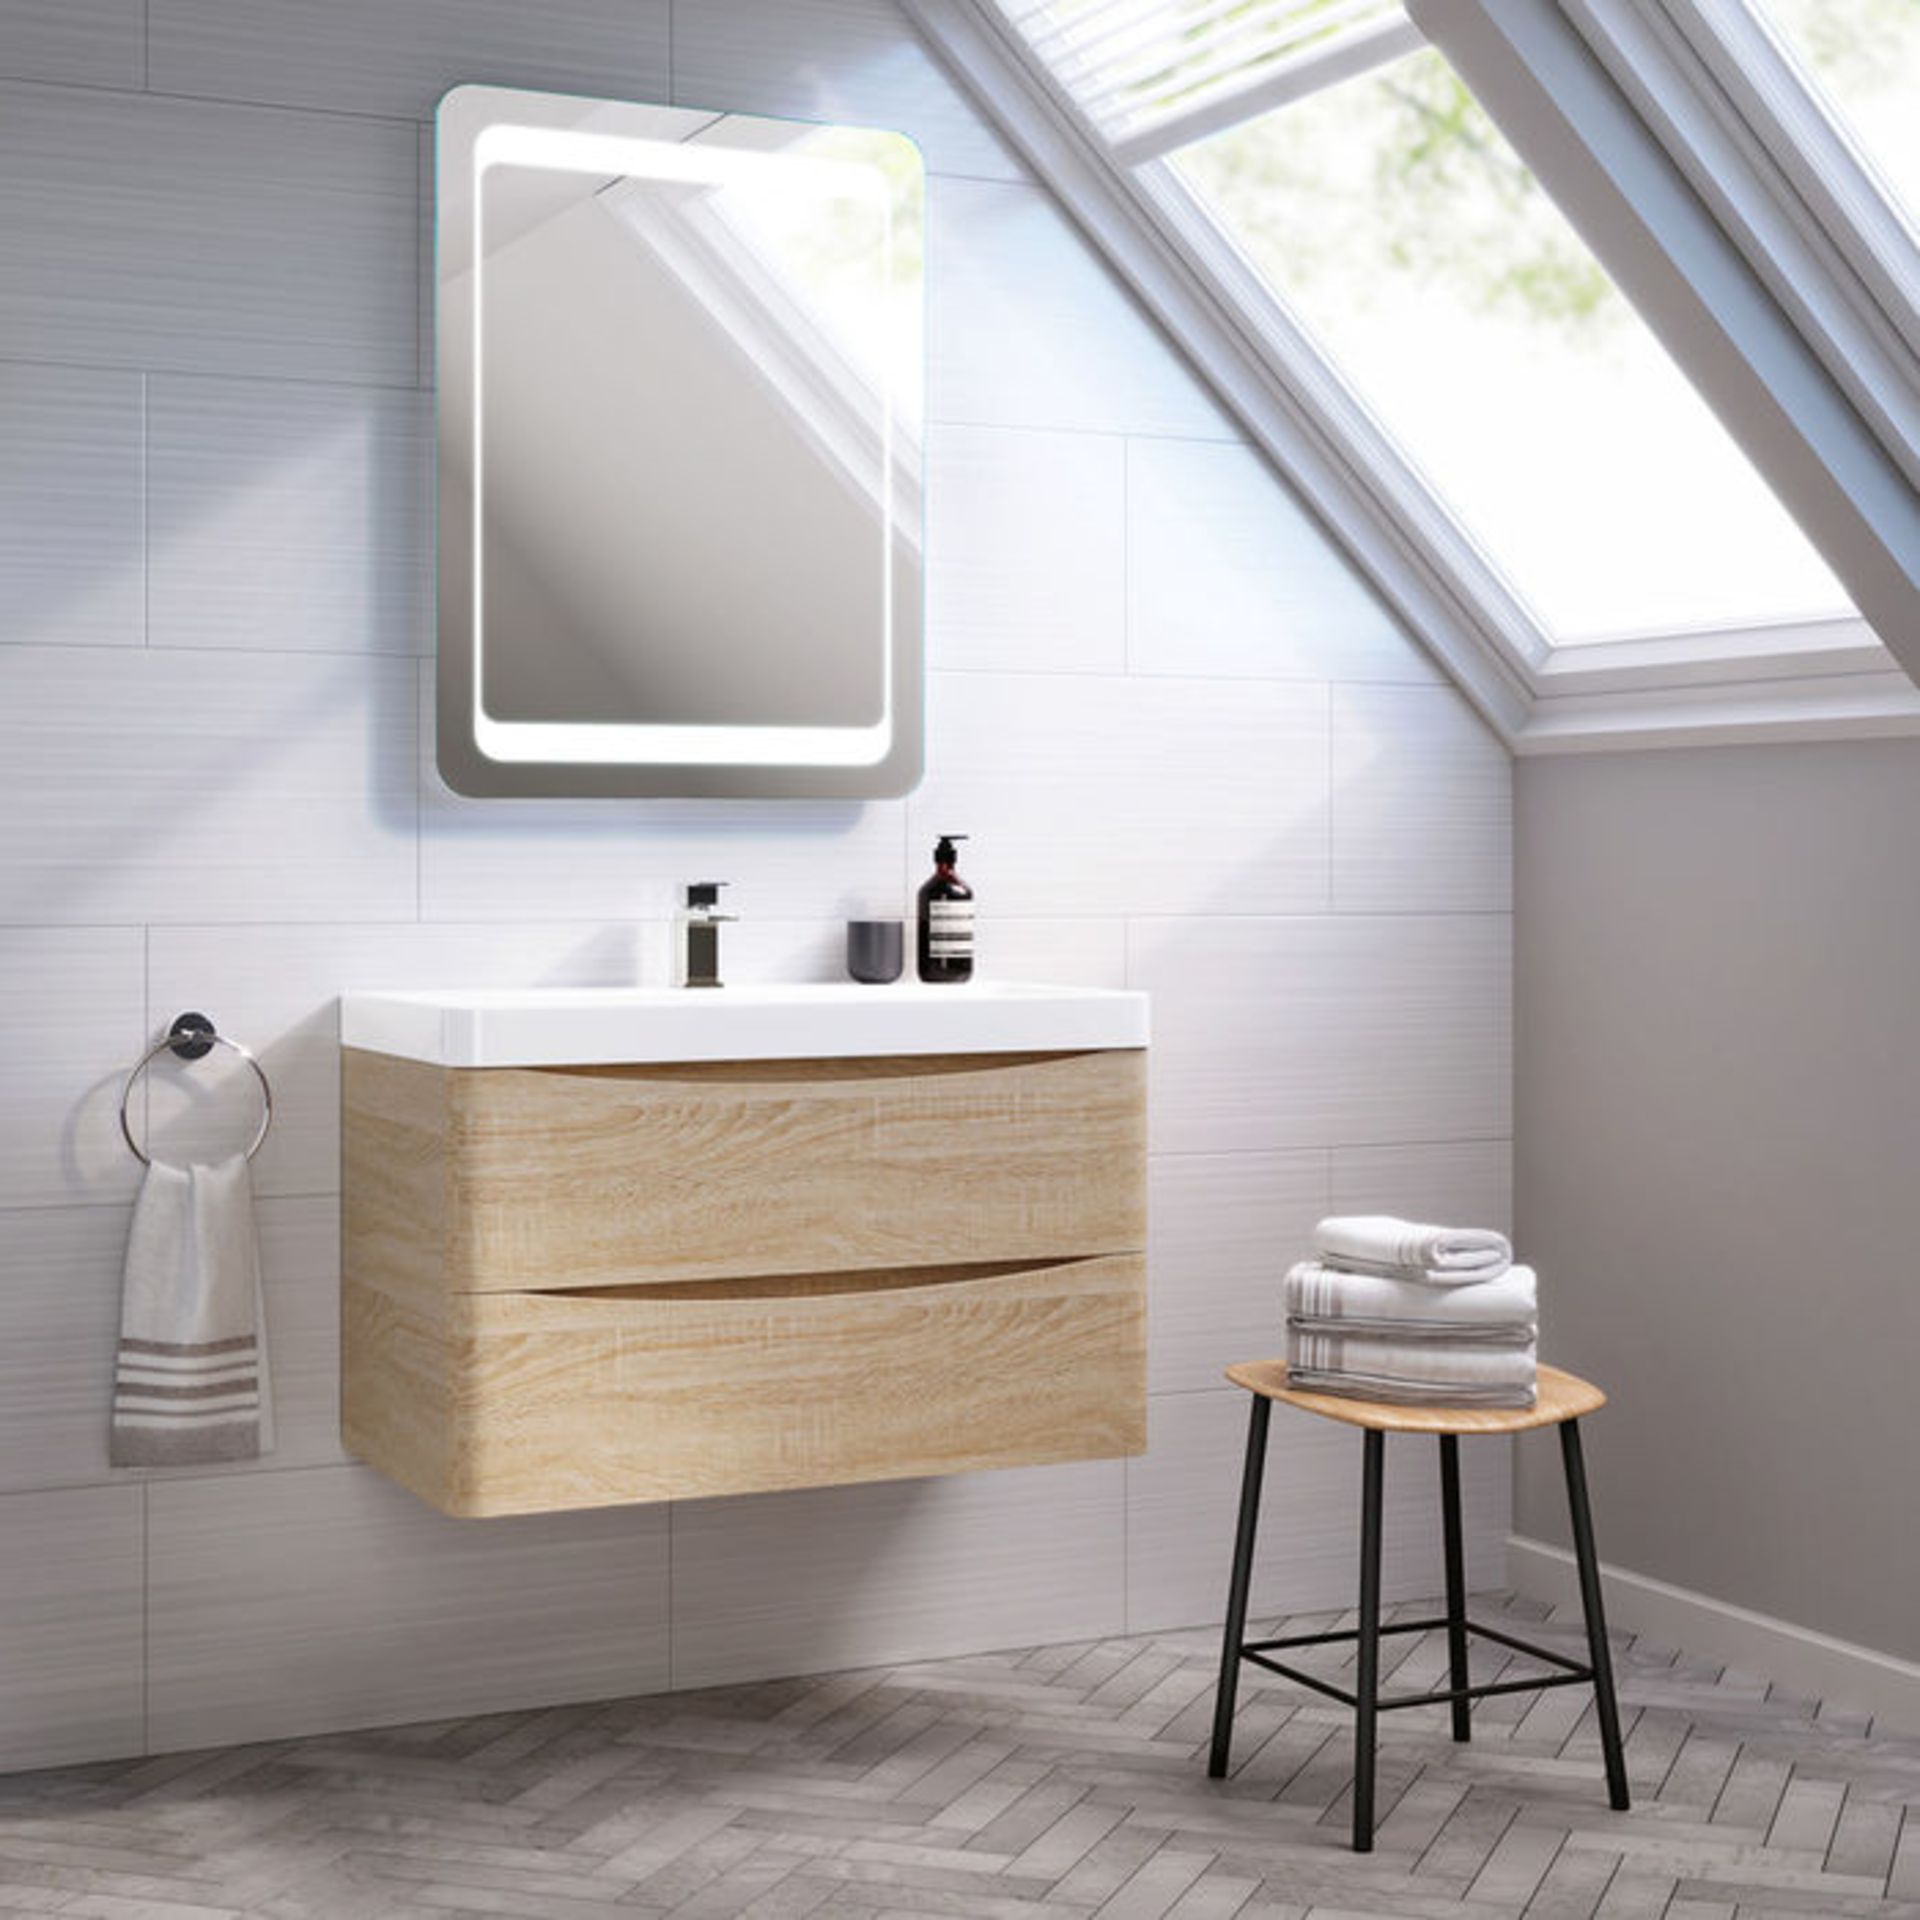 (Y57) 800x600mm Quasar Illuminated LED Mirror. RRP £349.99. Energy efficient LED lighting with - Image 8 of 9